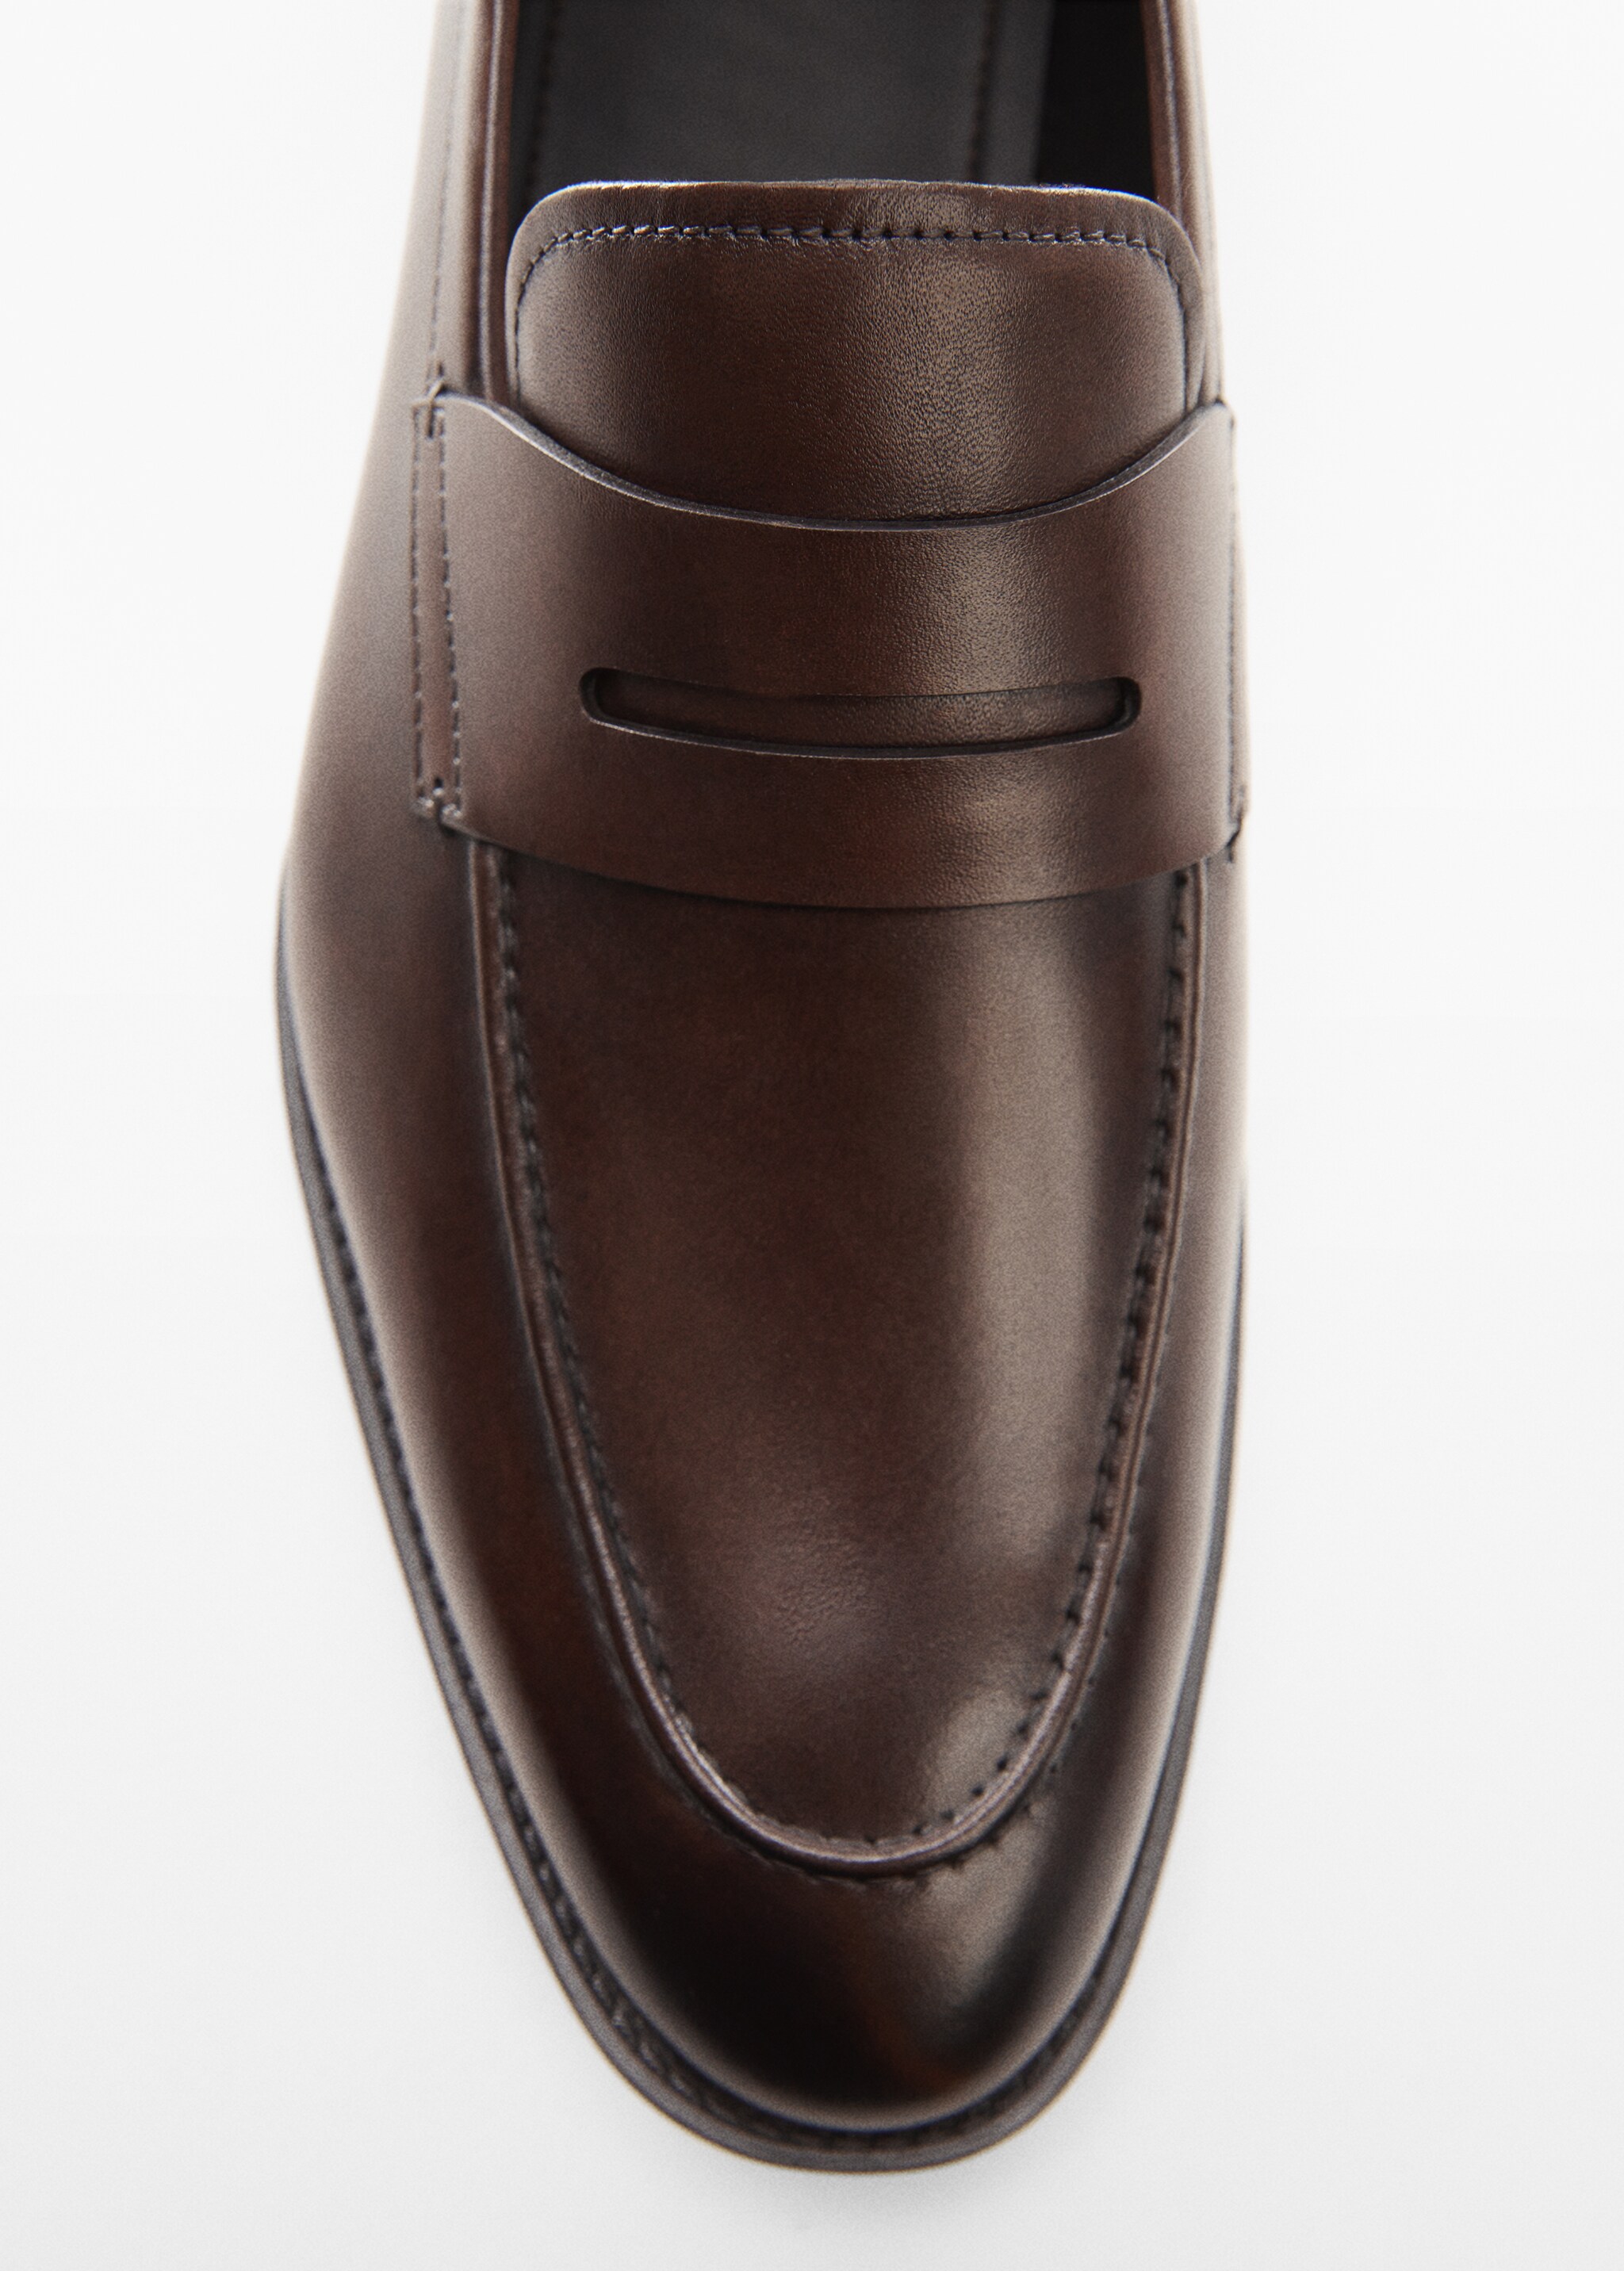 Aged-leather loafers - Details of the article 1